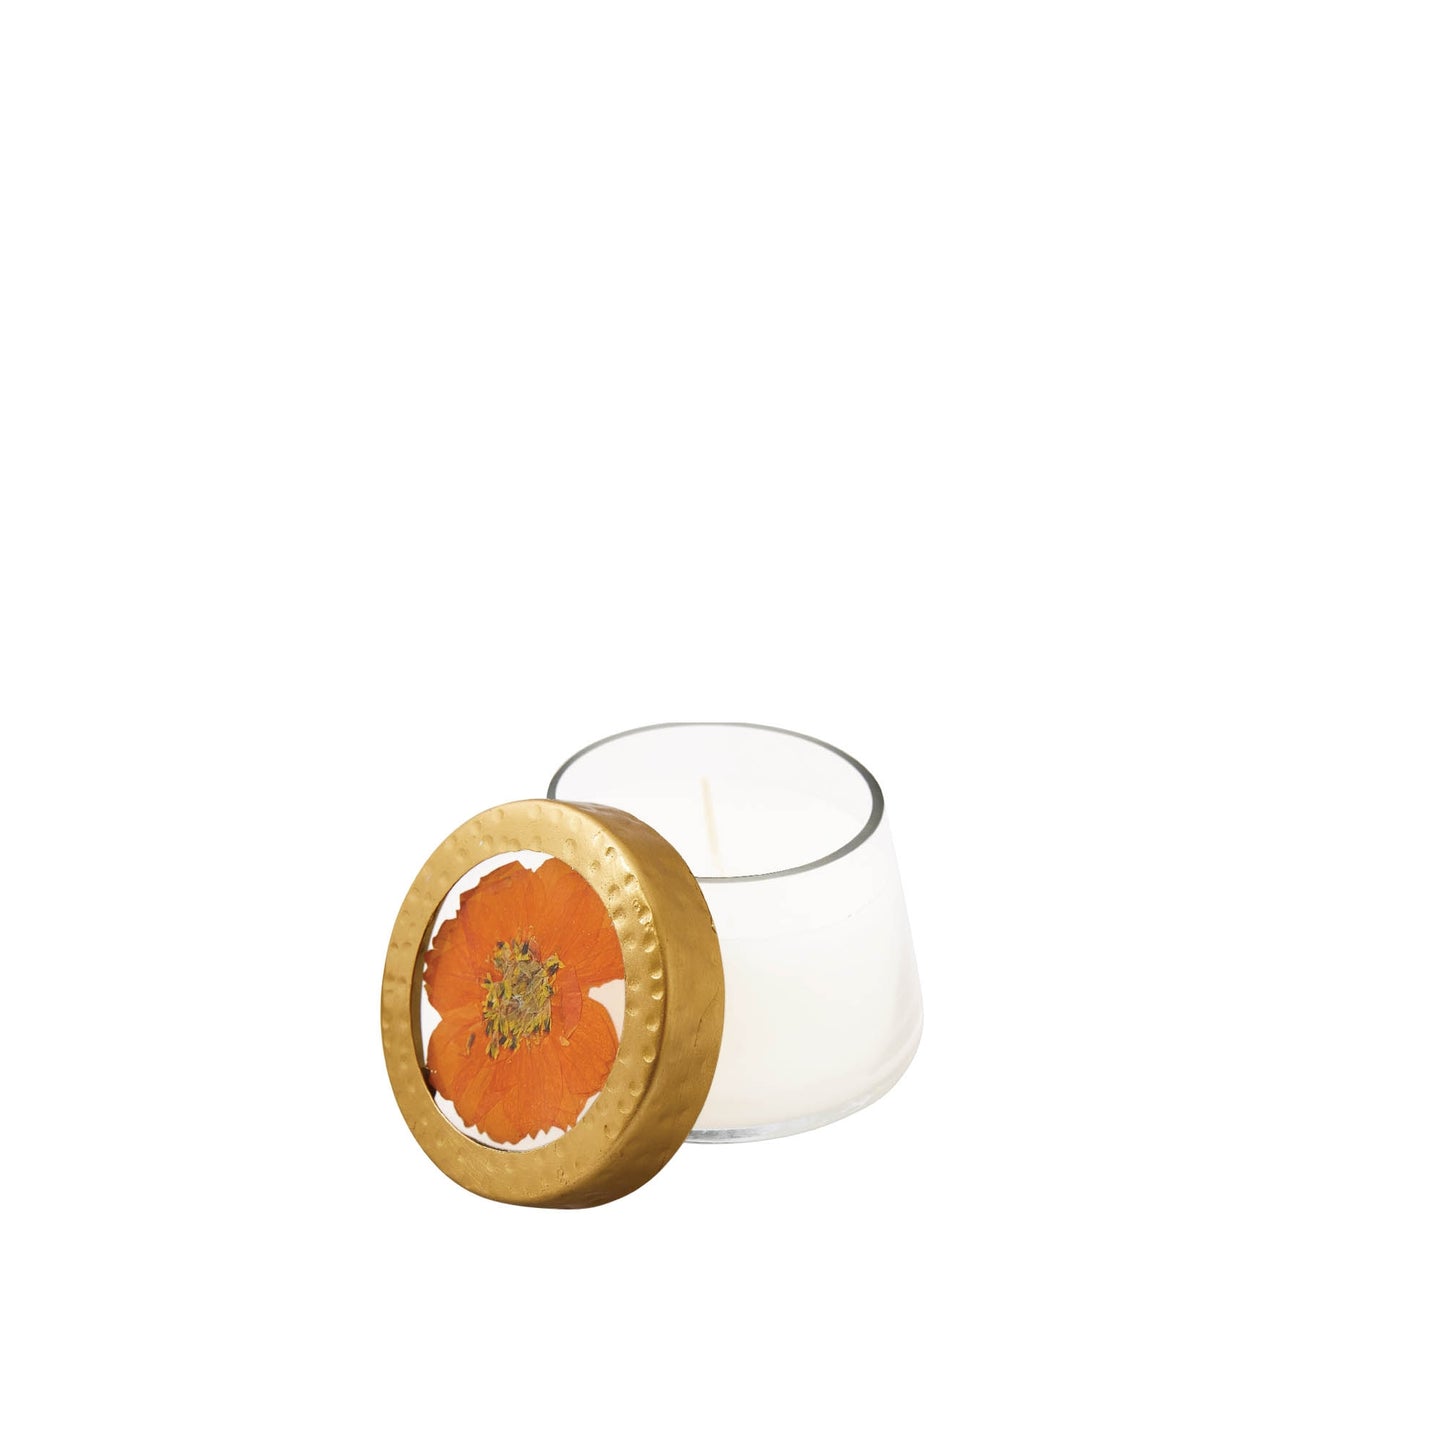 Sunlit Neroli Floral Candle - Small